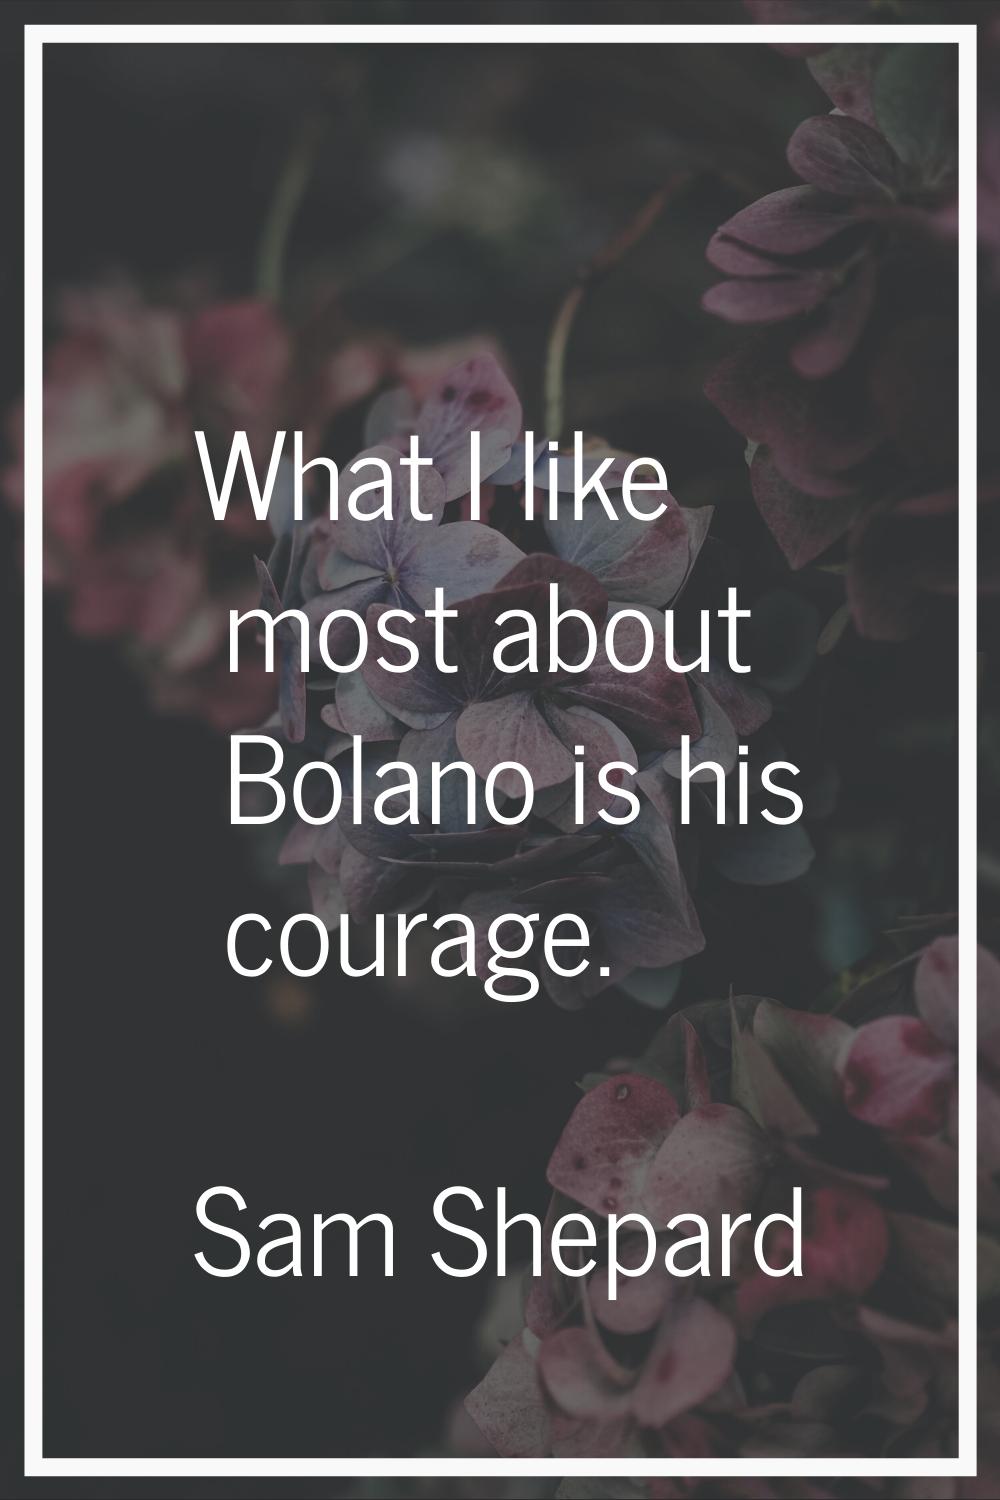 What I like most about Bolano is his courage.